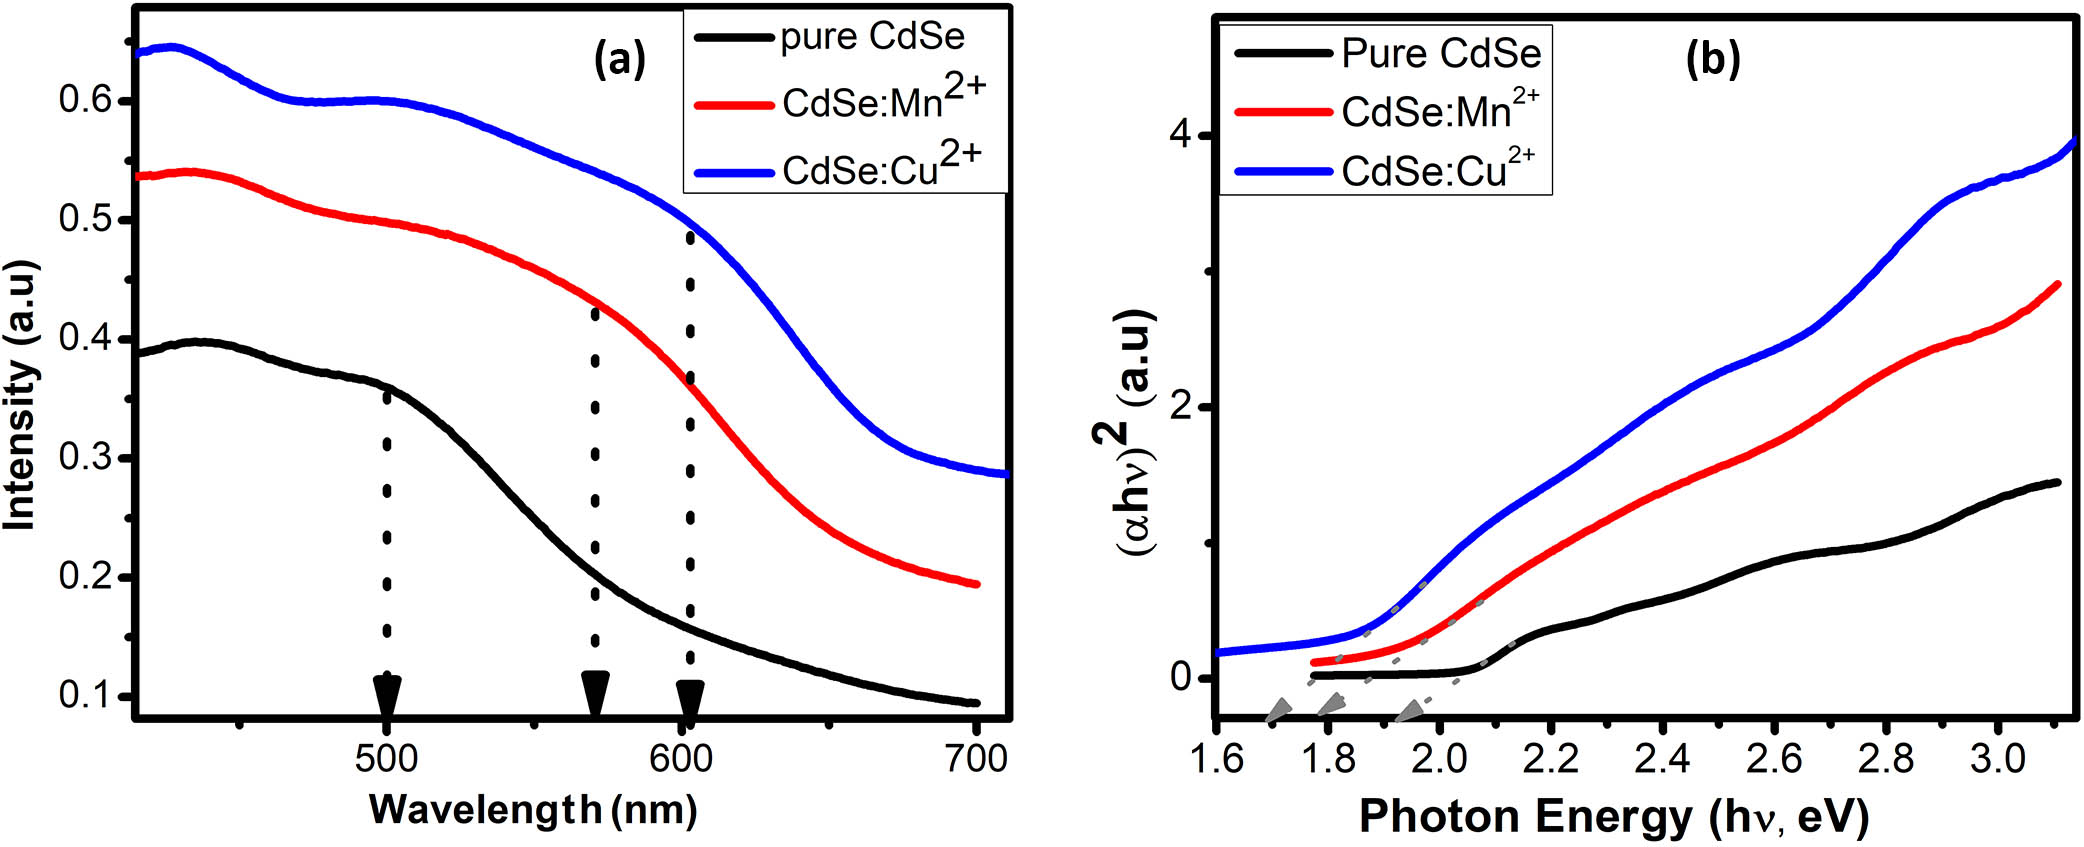 (a) UV-Vis spectra and (b) (αhν)2 vs (hν) curves of the pure CdS/CdSe and co-sensitized CdS/CdSe:Mn2+ (or Cu2+) QDSSCs.